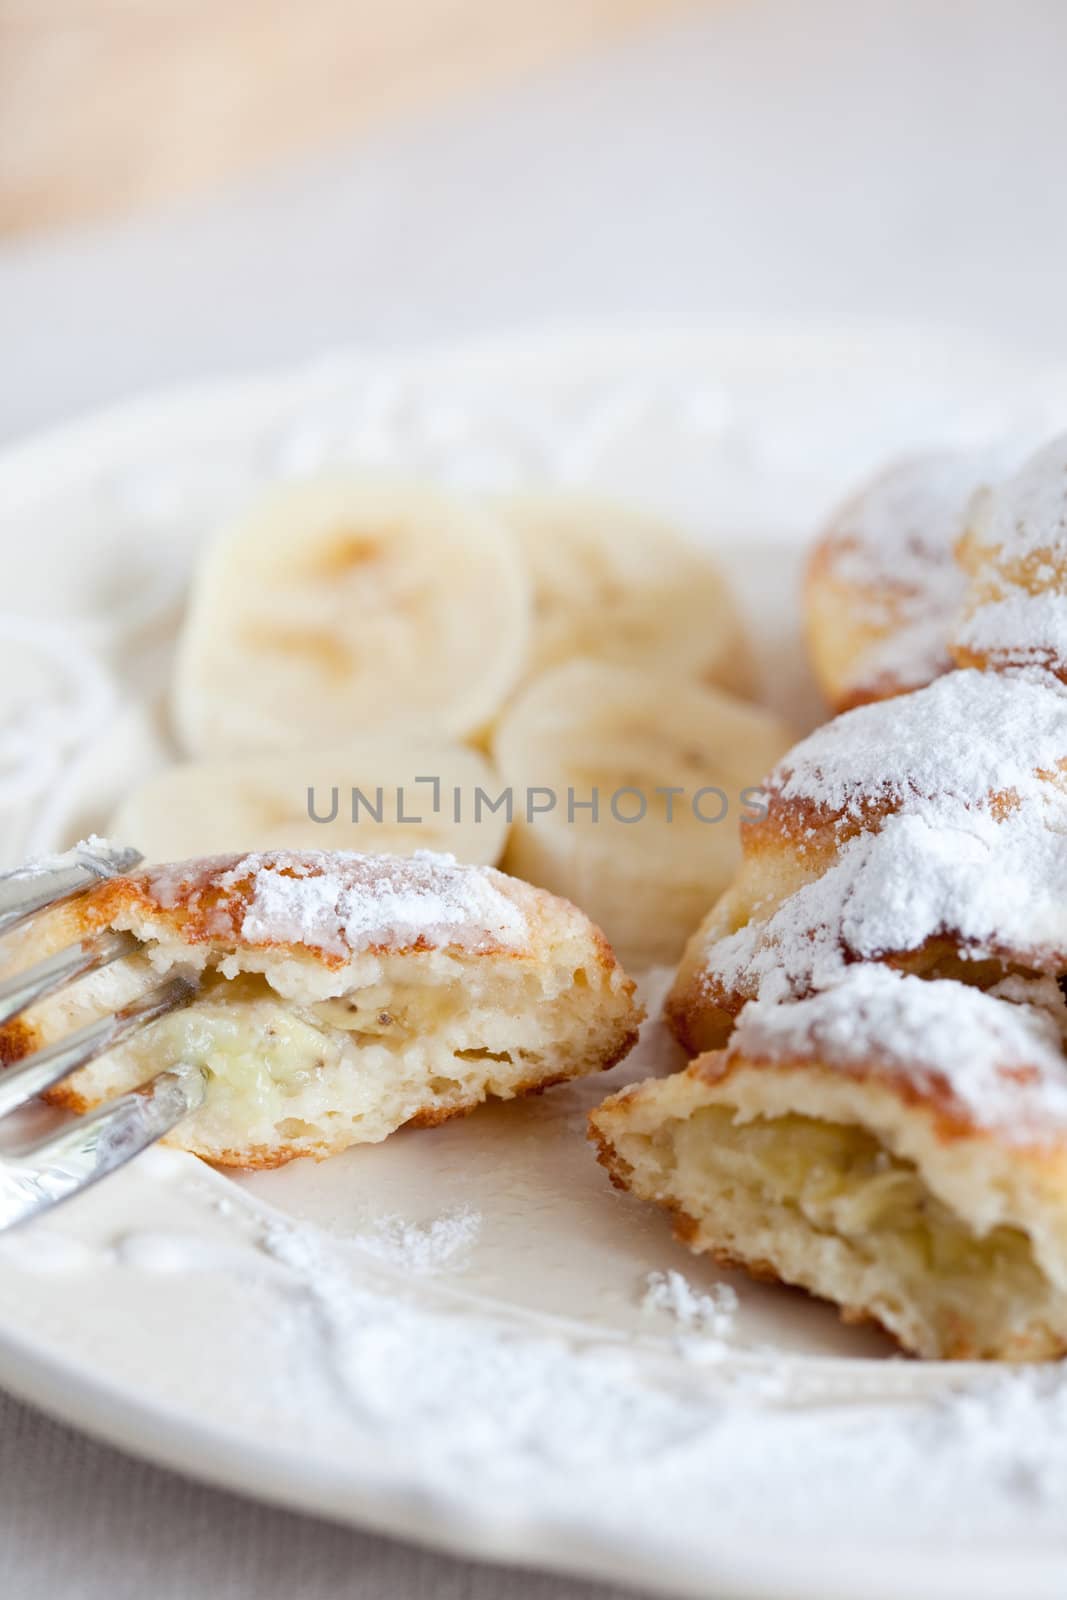 Delicious Danish pancakes by Fotosmurf